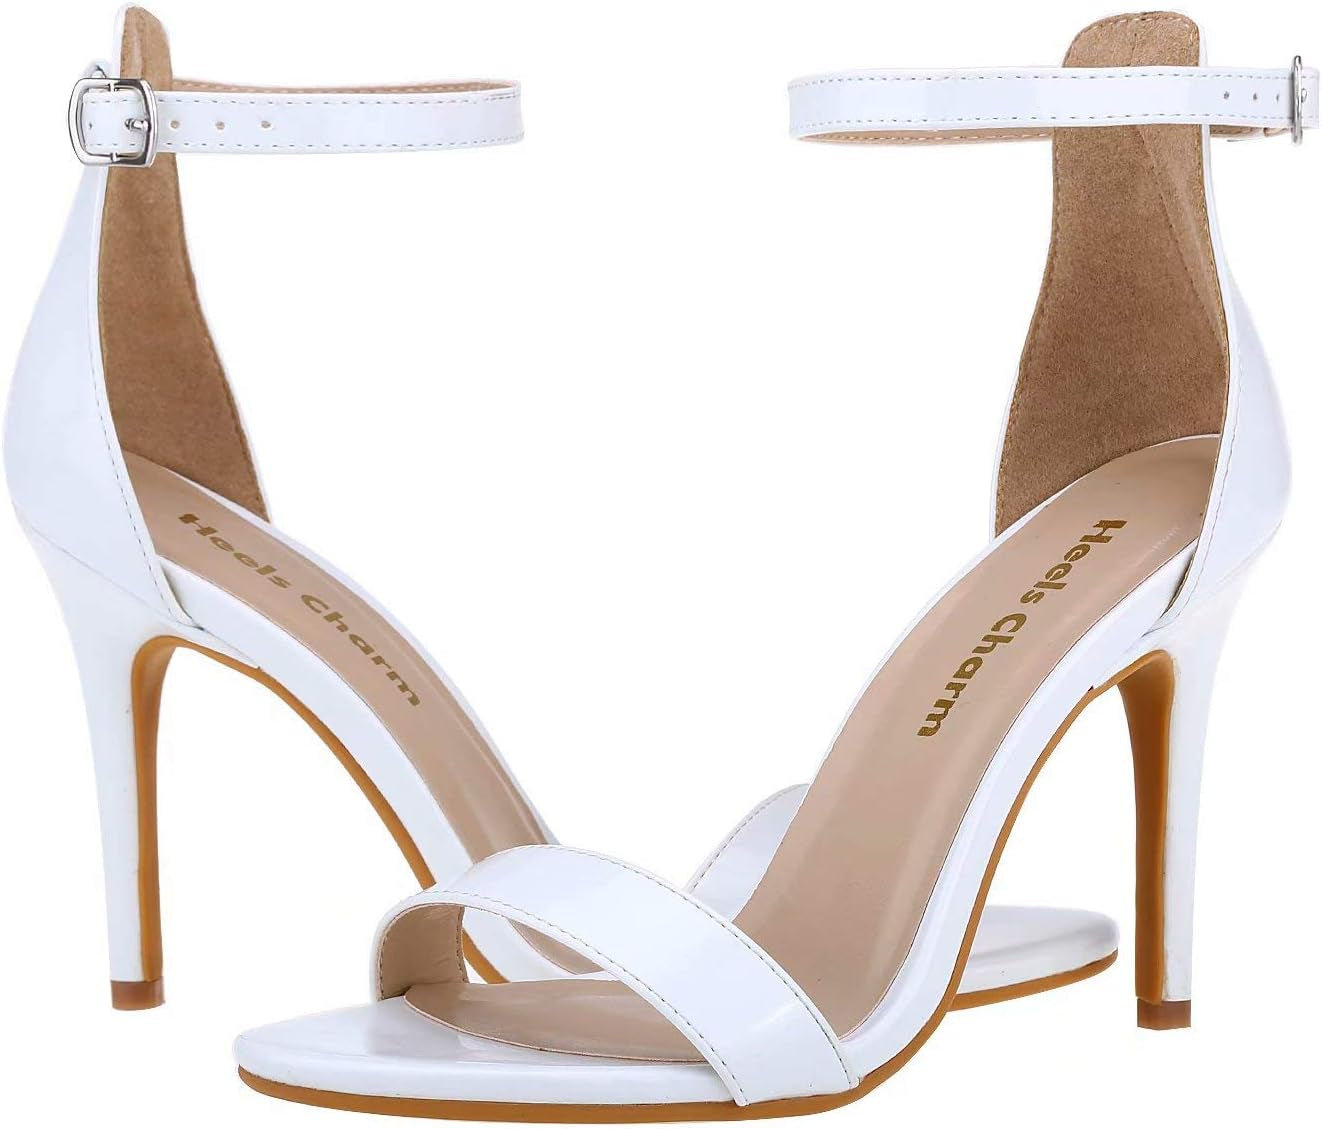 "Stylish Strappy Stiletto Heeled Sandals - Elevate Your Look for Any Special Occasion!"